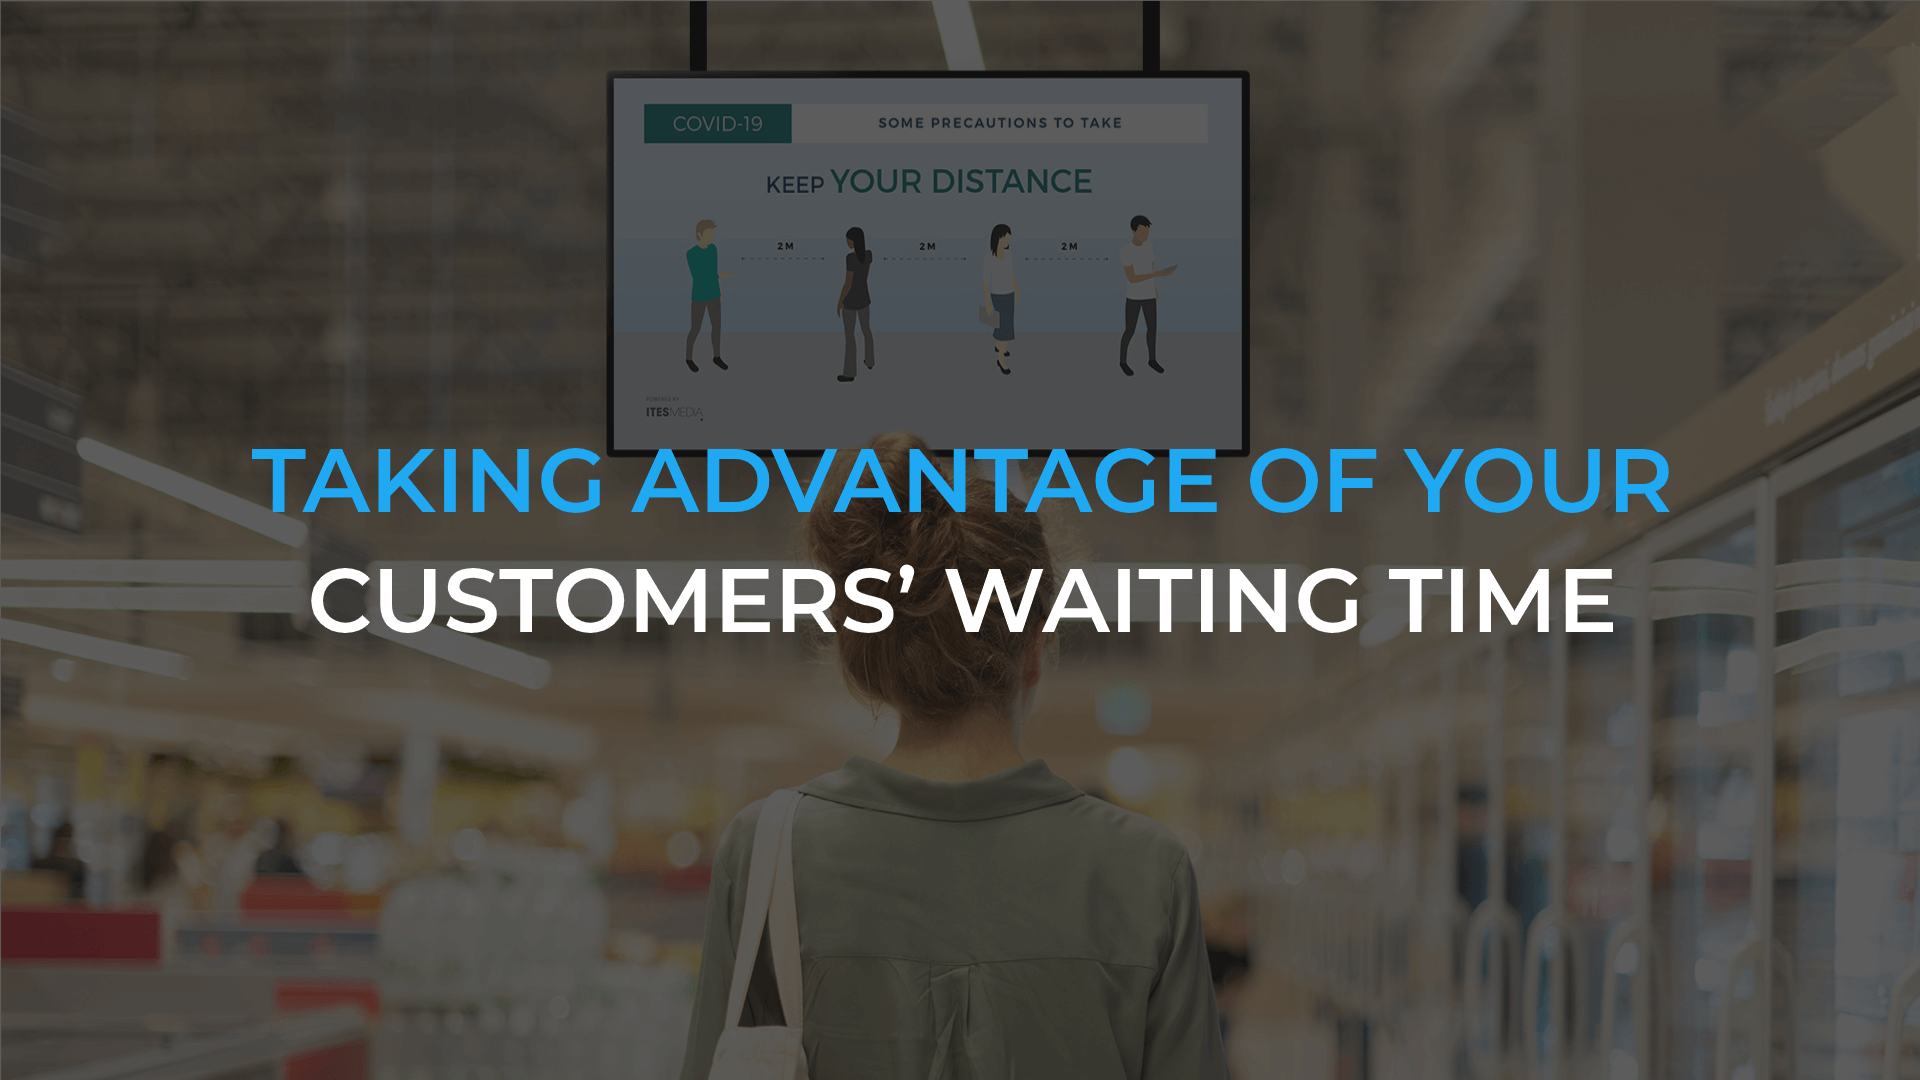 Taking advantage of your customers’ waiting time